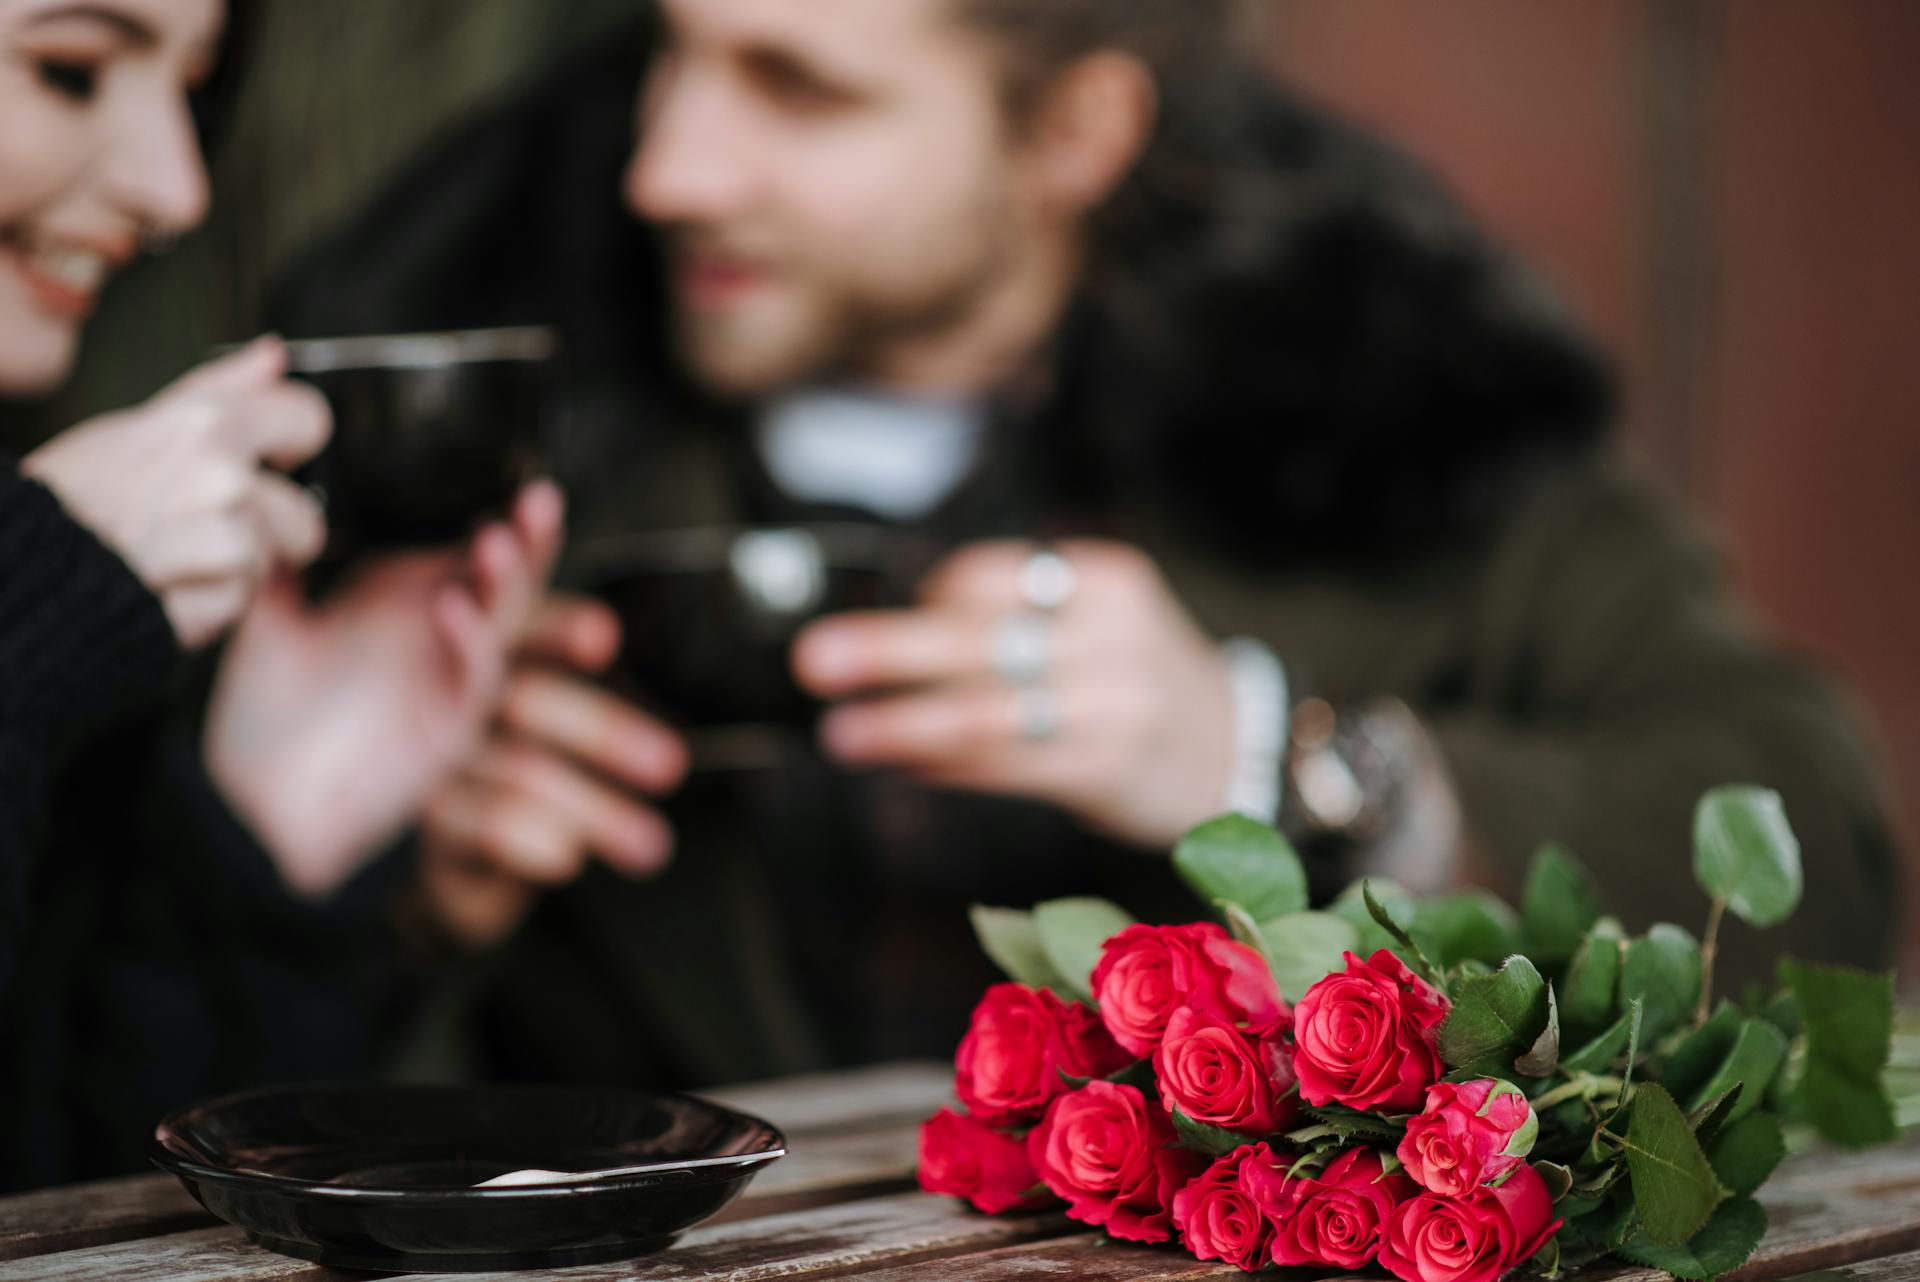 Crop couple with coffee interacting at cafe table with flowers